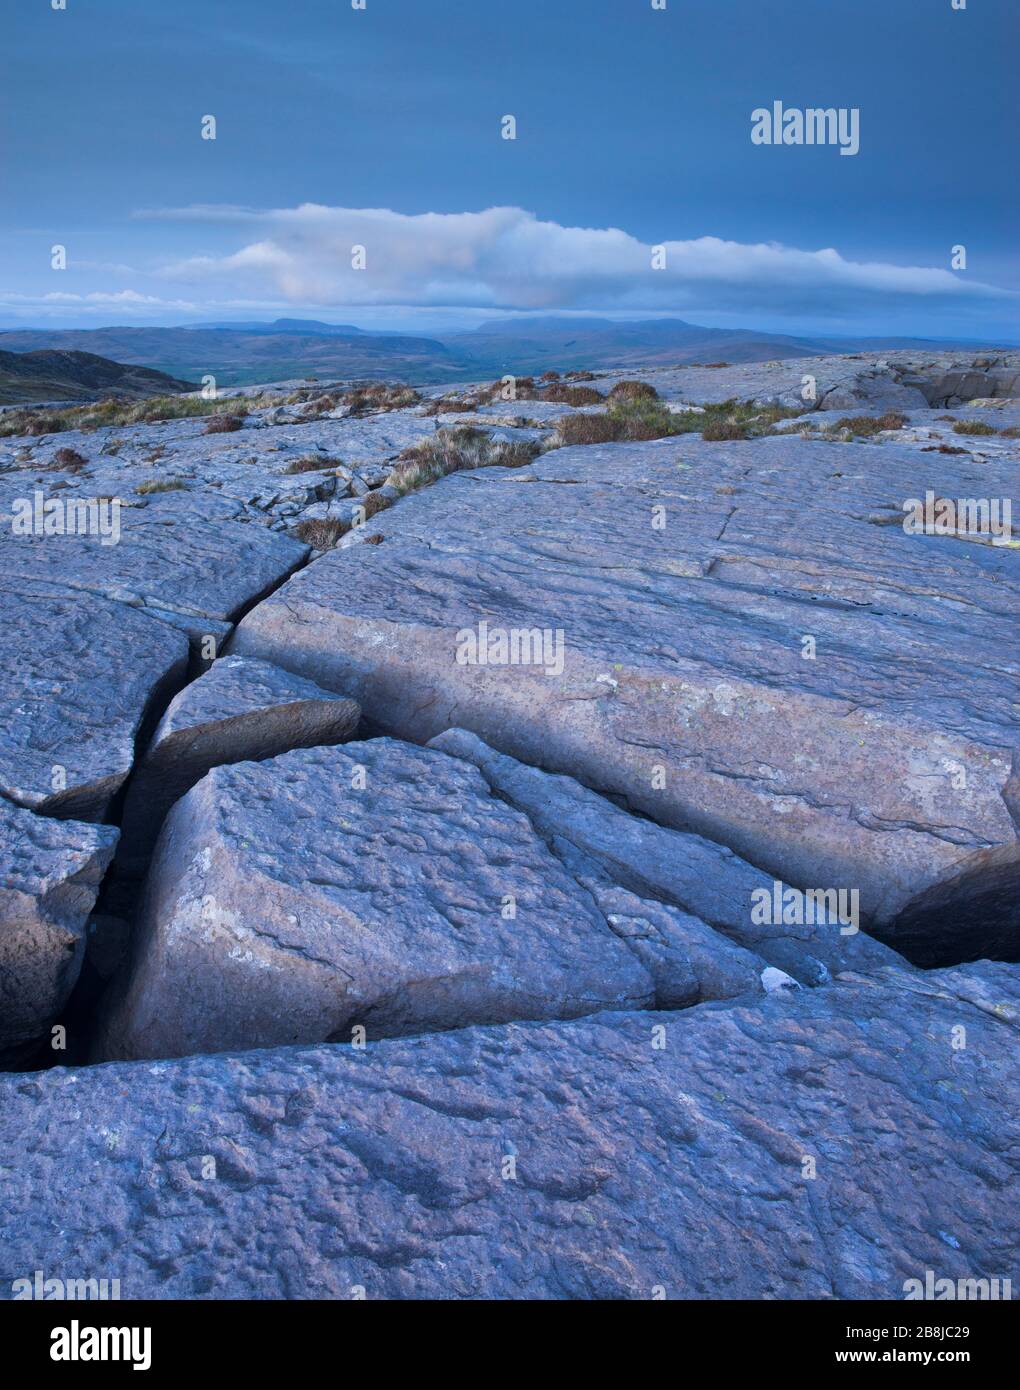 The Rhinogydd Mountains, East of Harlech, Snowdonia, North Wales, UK. Stock Photo